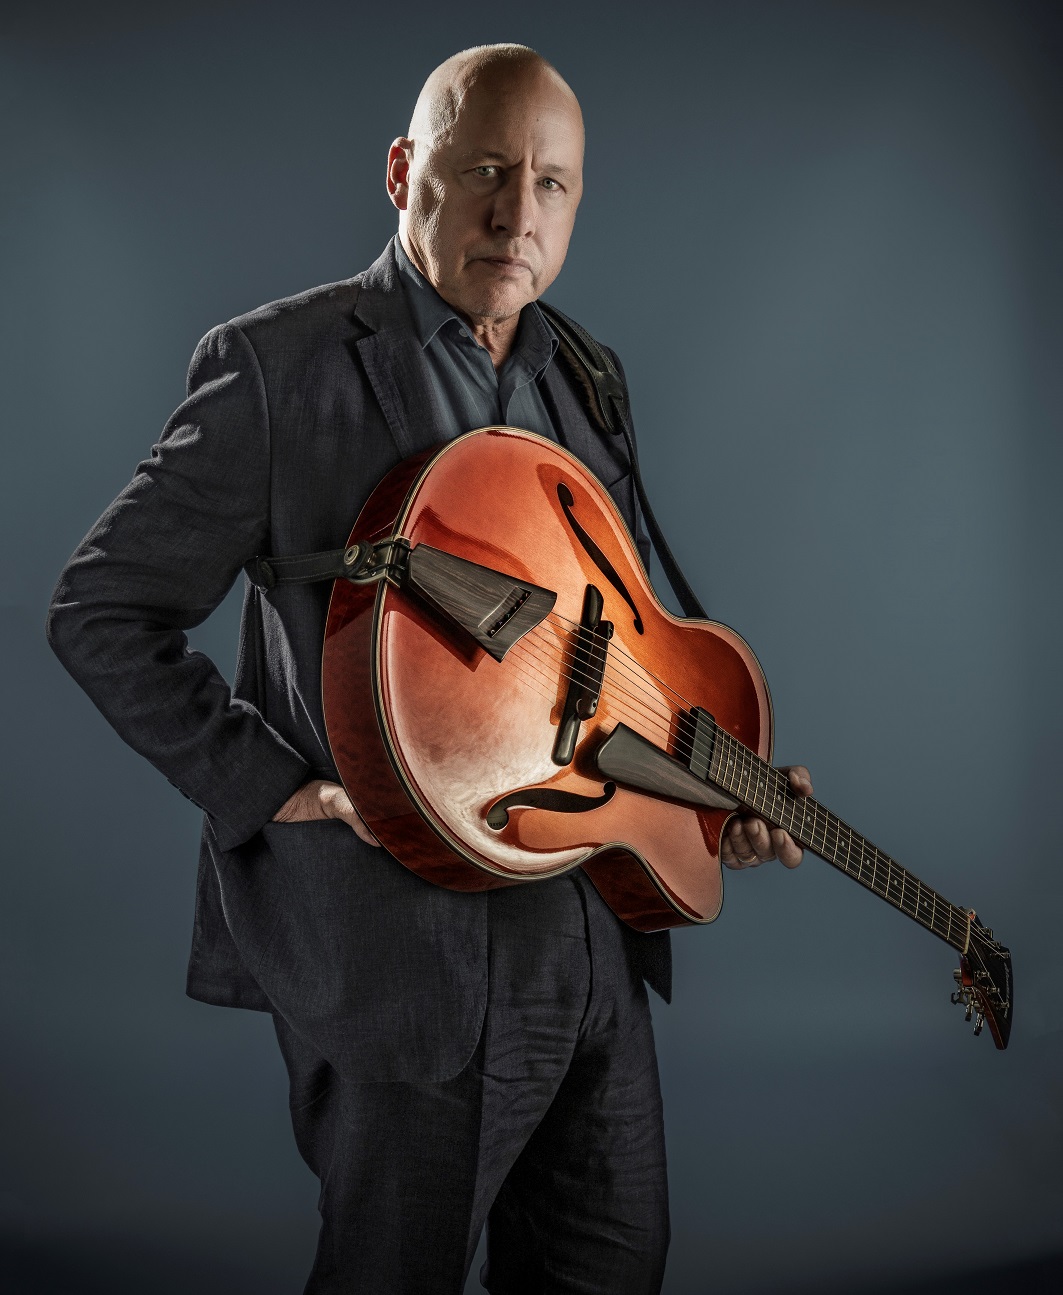 Mark Knopfler sets North American tour dates for summer 2019 in support